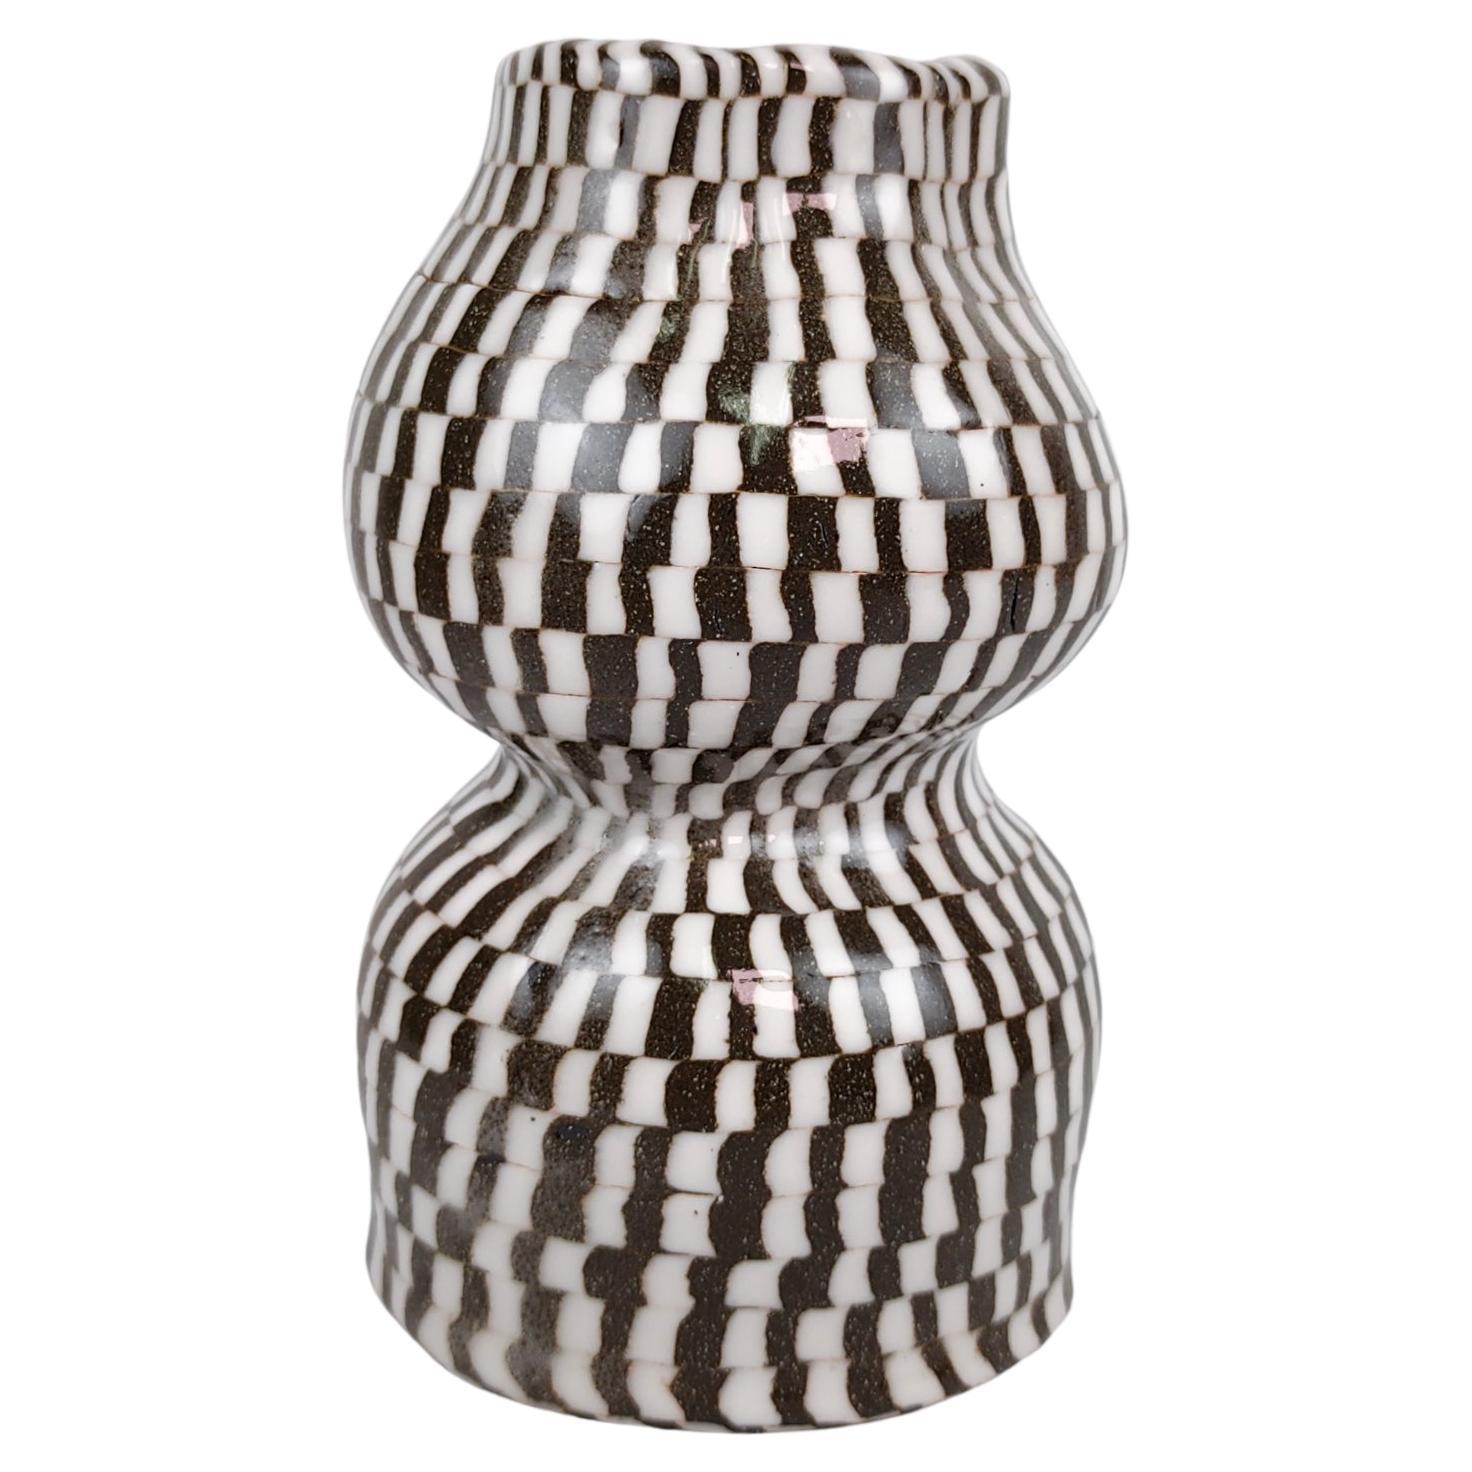 Nerikomi Checkered Organic Modern Pinched Handmade Vase by Fizzy Ceramics For Sale